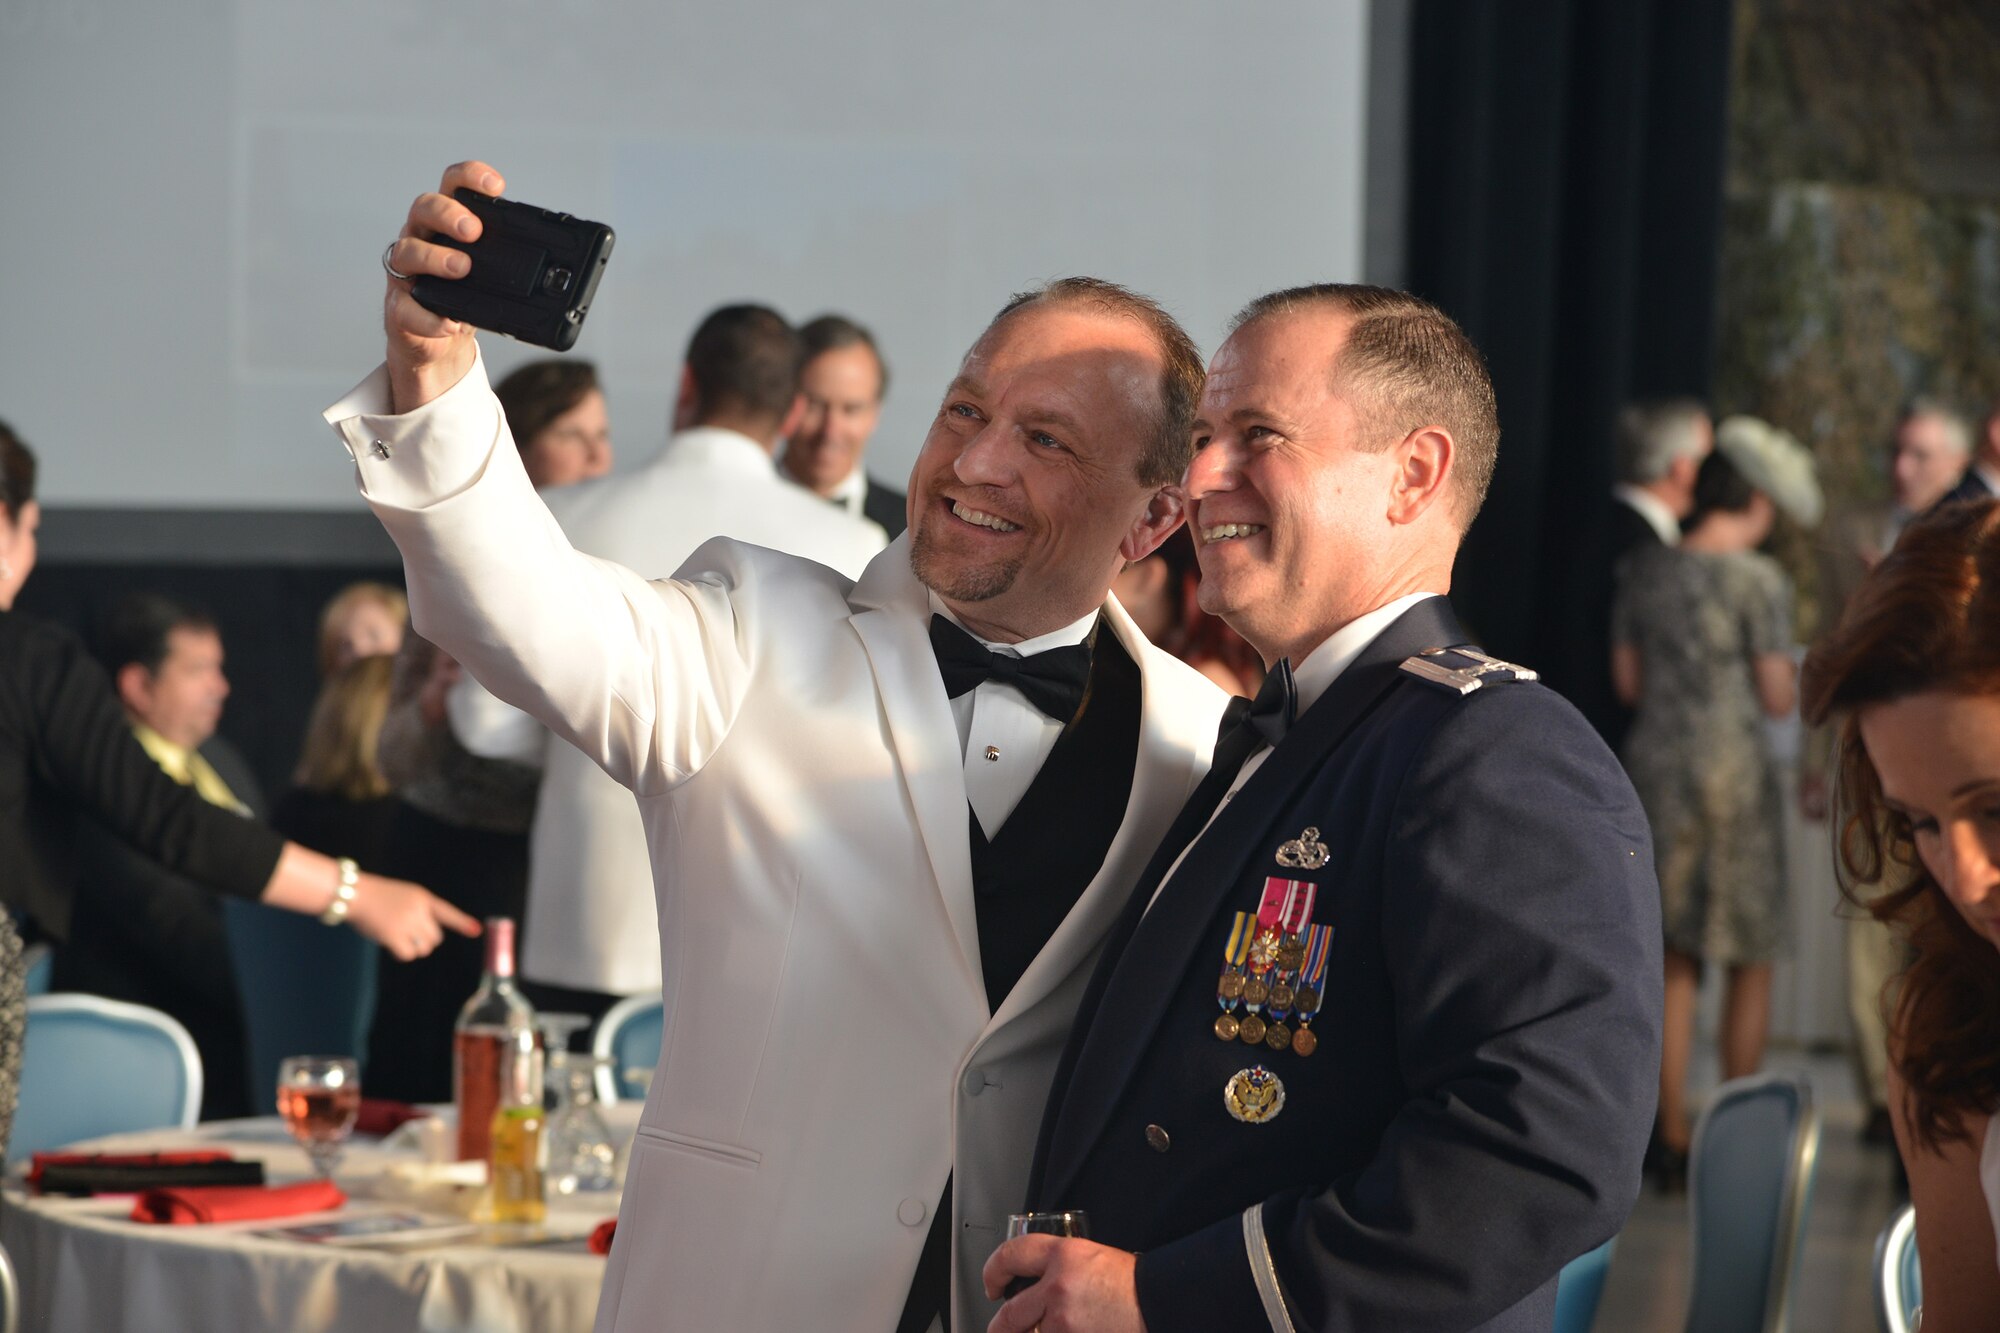 Col. Eric Froehlich, left, commander of the 377th Air Base Wing, takes a moment at Kirtland's anniversary banquet to take a selfie with Mayor Gregory Hull, mayor of Rio Rancho. About 500 people attended the anniversary banquet at the New Mexico Air National Guard’s 150th Special Operations Wing hangar April 16. The banquet had a 1940s theme, to remember the opening of Albuquerque Army Air Base on Jan. 7, 1941. Period attire and static displays of World War II vehicles helped bring the theme to life. (Photo by Todd Berenger)